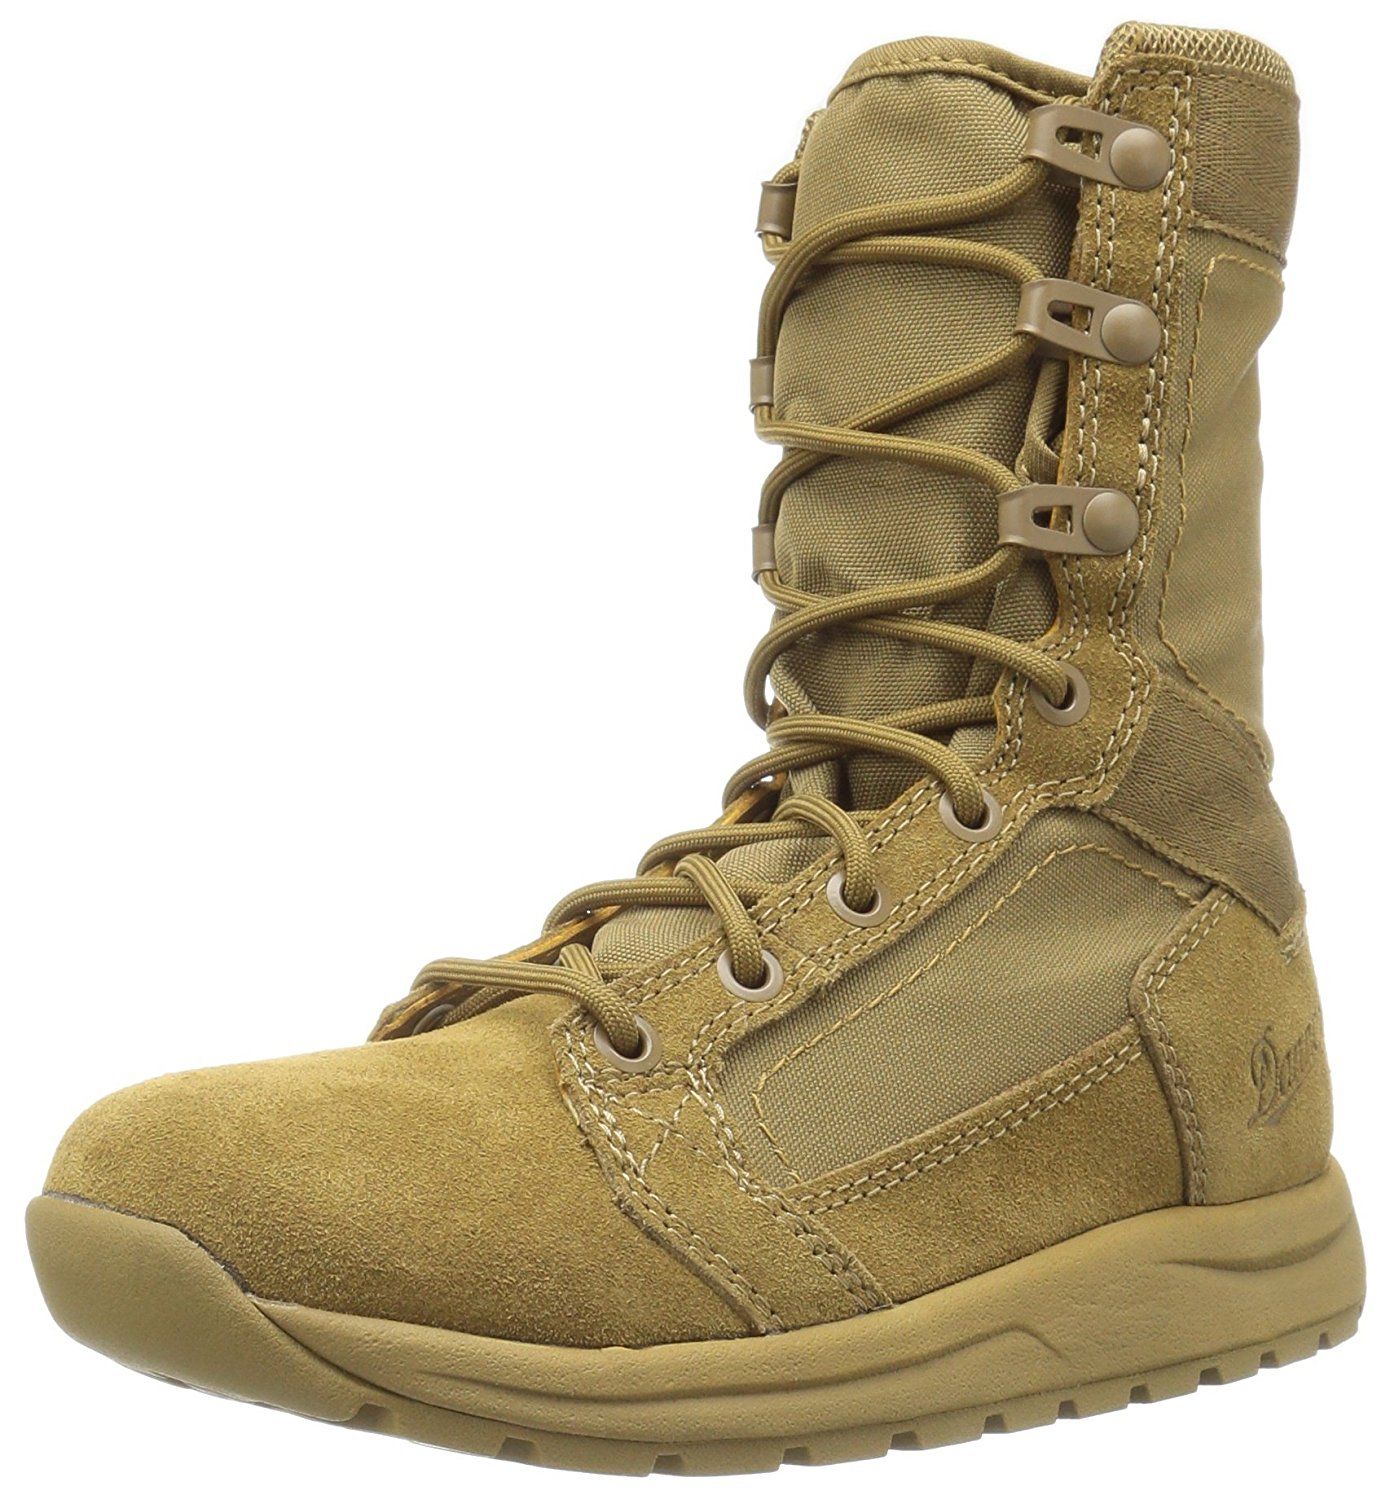 Danner Men's Tachyon 8 Inch Coyote Military and Tactical Boot